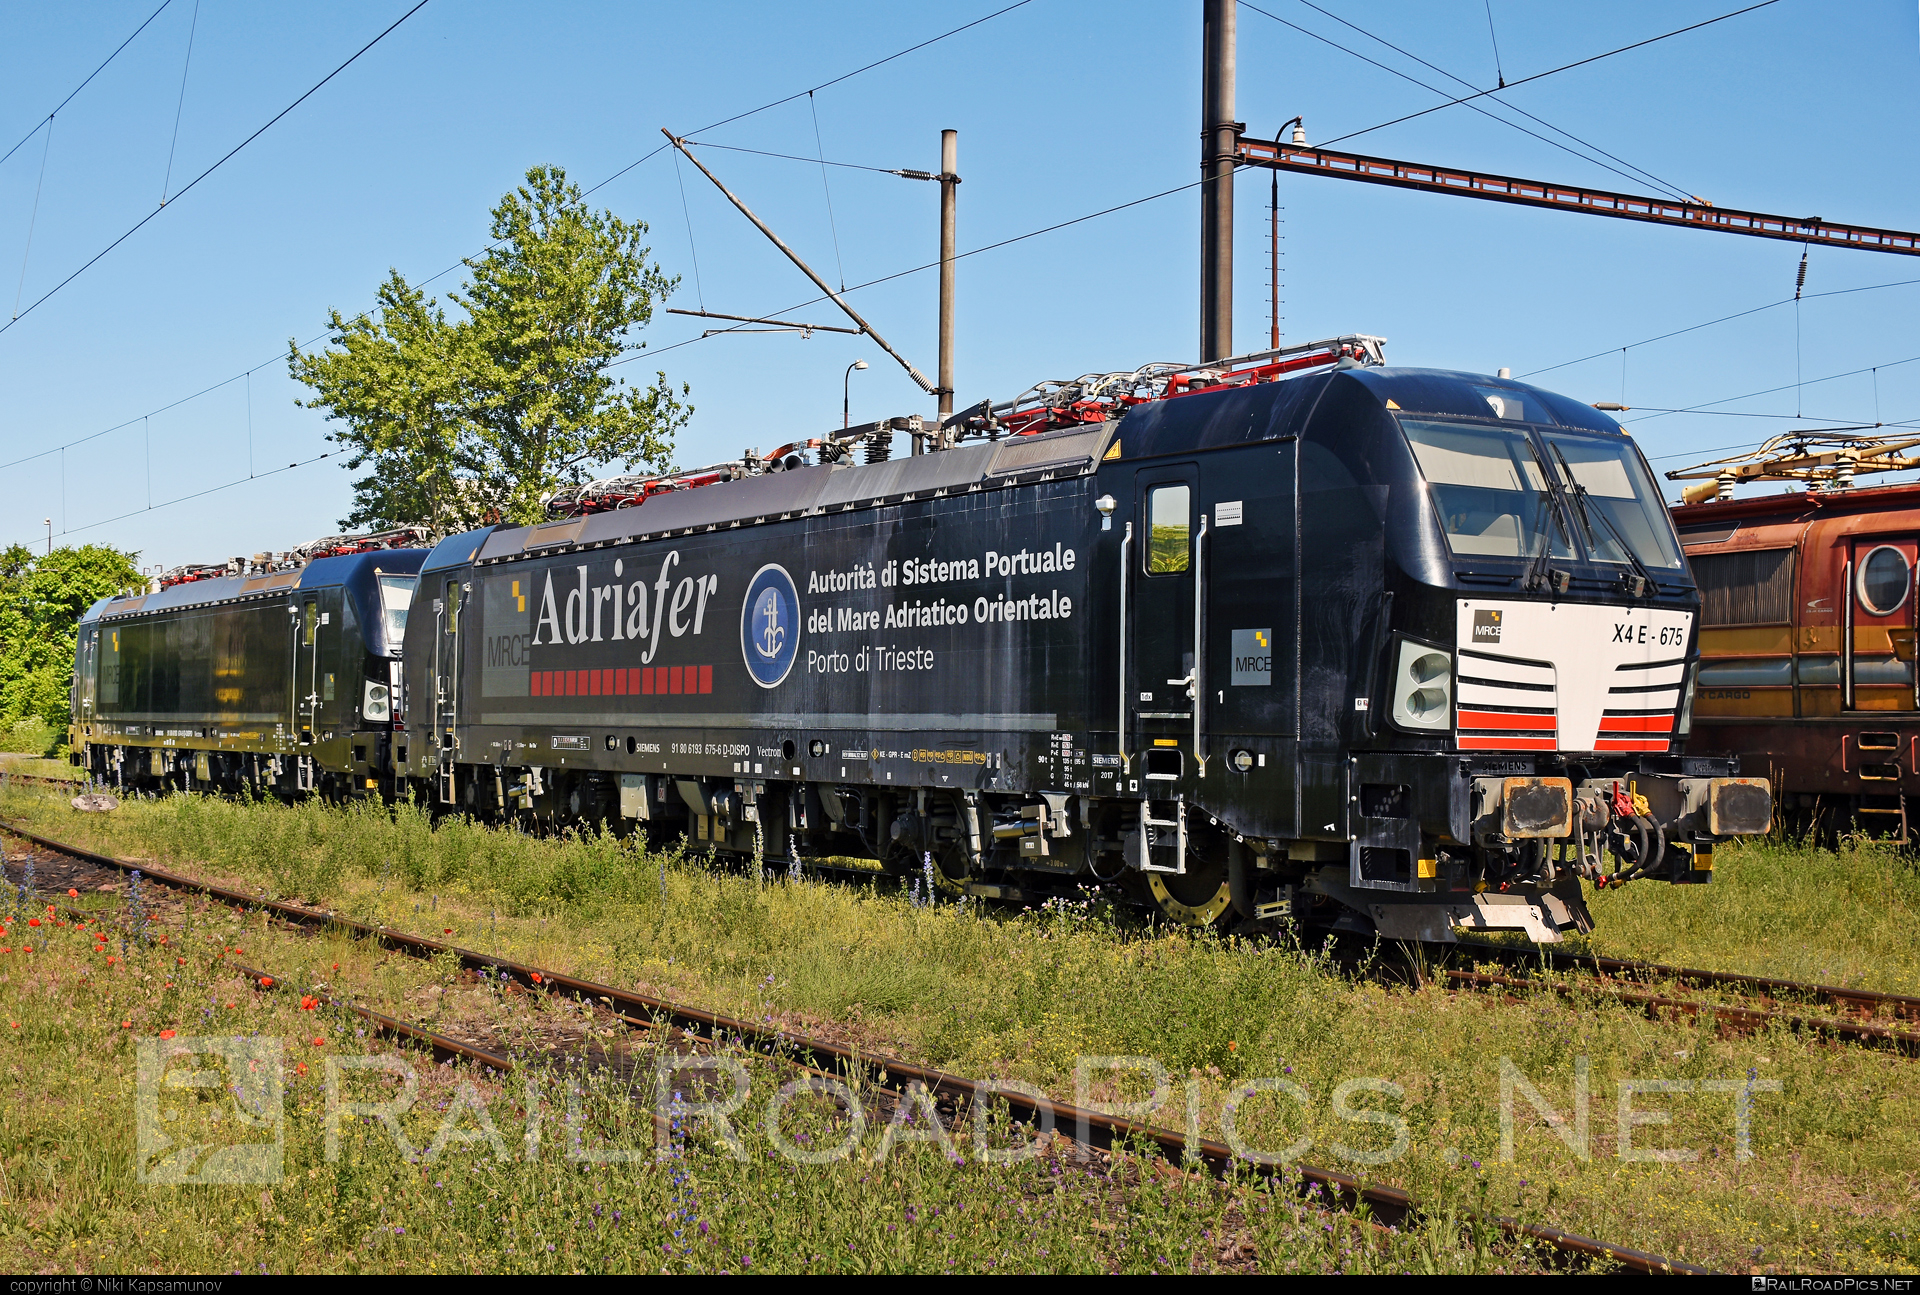 Siemens Vectron MS - 193 675-6 operated by ADRIAFER S.R.L. #adriafer #dispolok #mitsuirailcapitaleurope #mitsuirailcapitaleuropegmbh #mrce #siemens #siemensVectron #siemensVectronMS #vectron #vectronMS